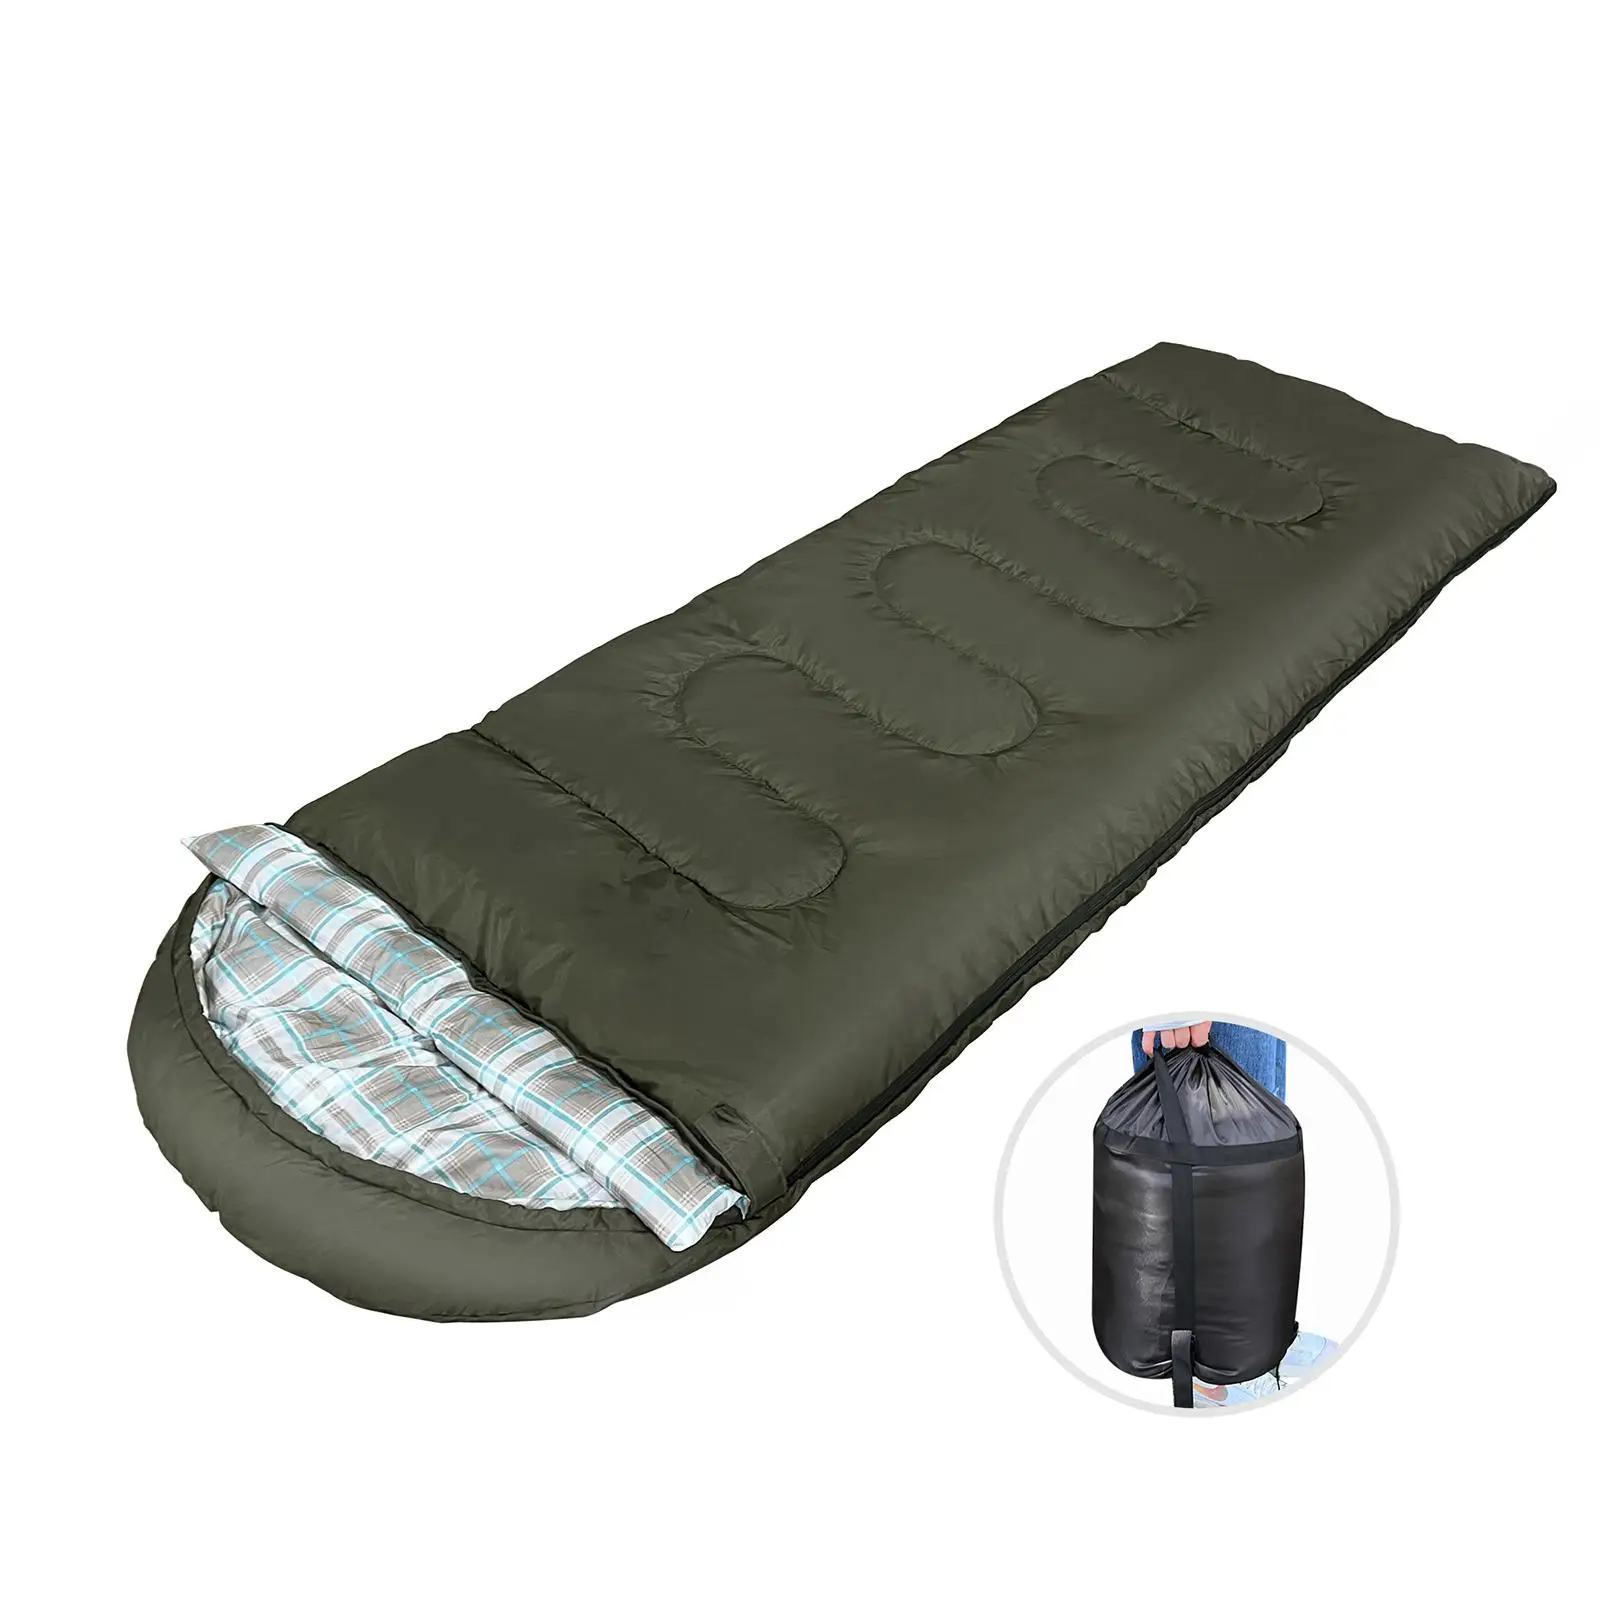 Camping Sleeping Bag Thermal Lightweight Mat Breathable Soft Waterproof Sleeping Bag for Camping Adult Outdoor